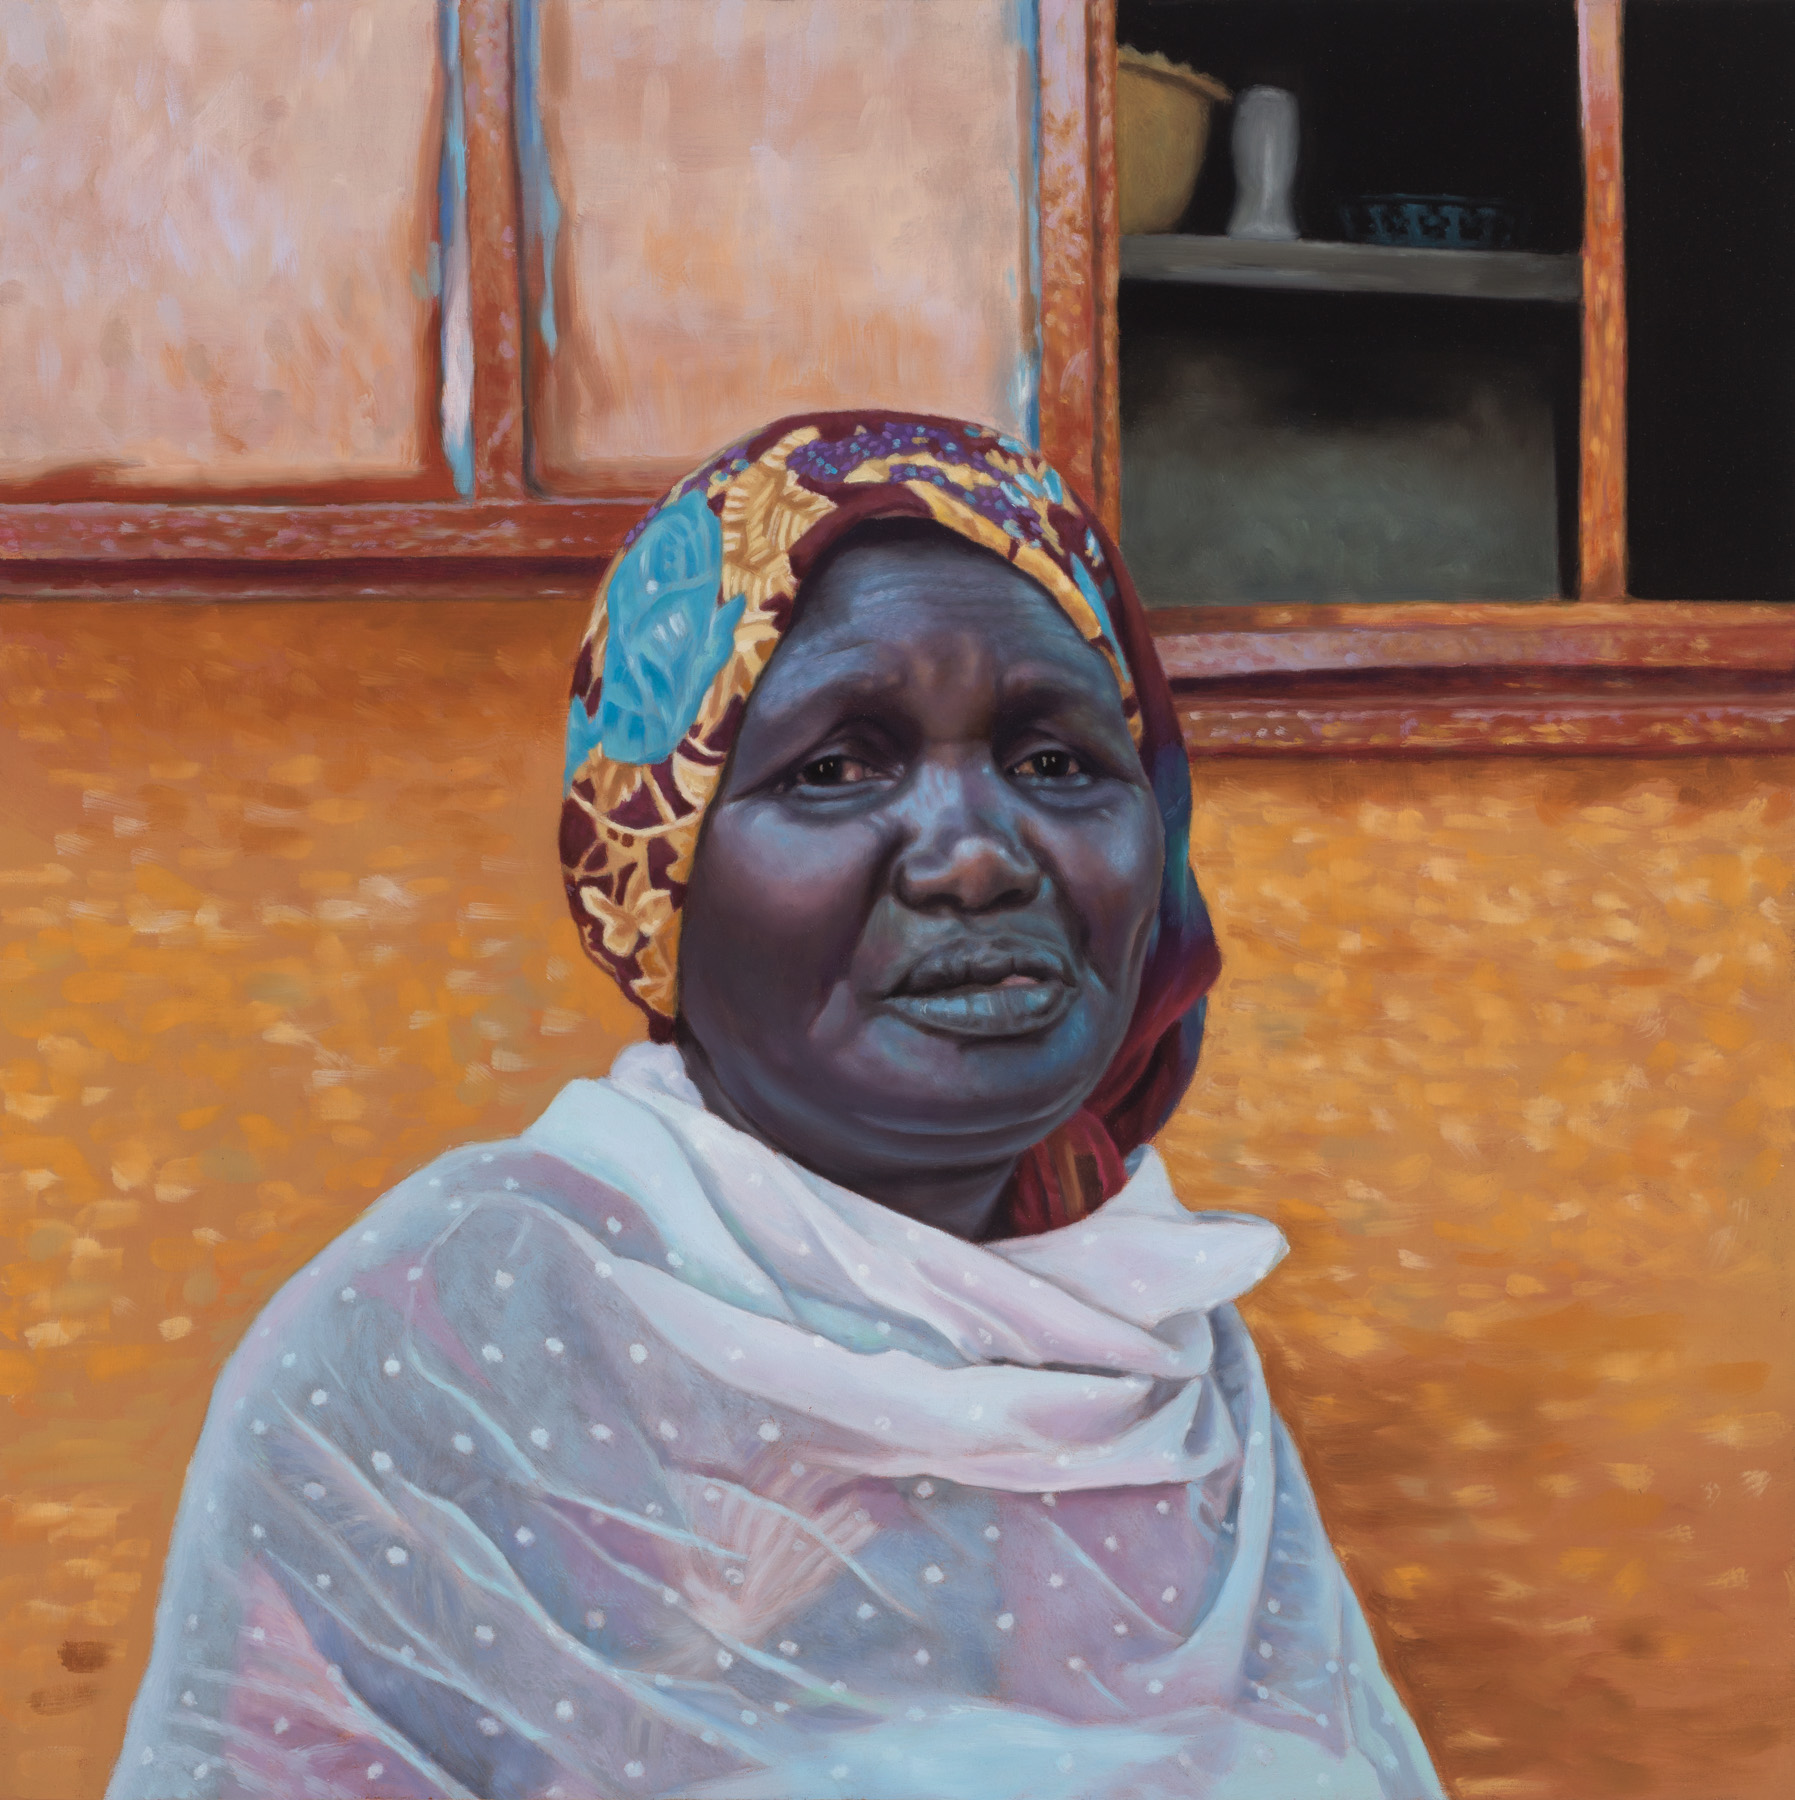 Oil painting of a person wearing head scarf